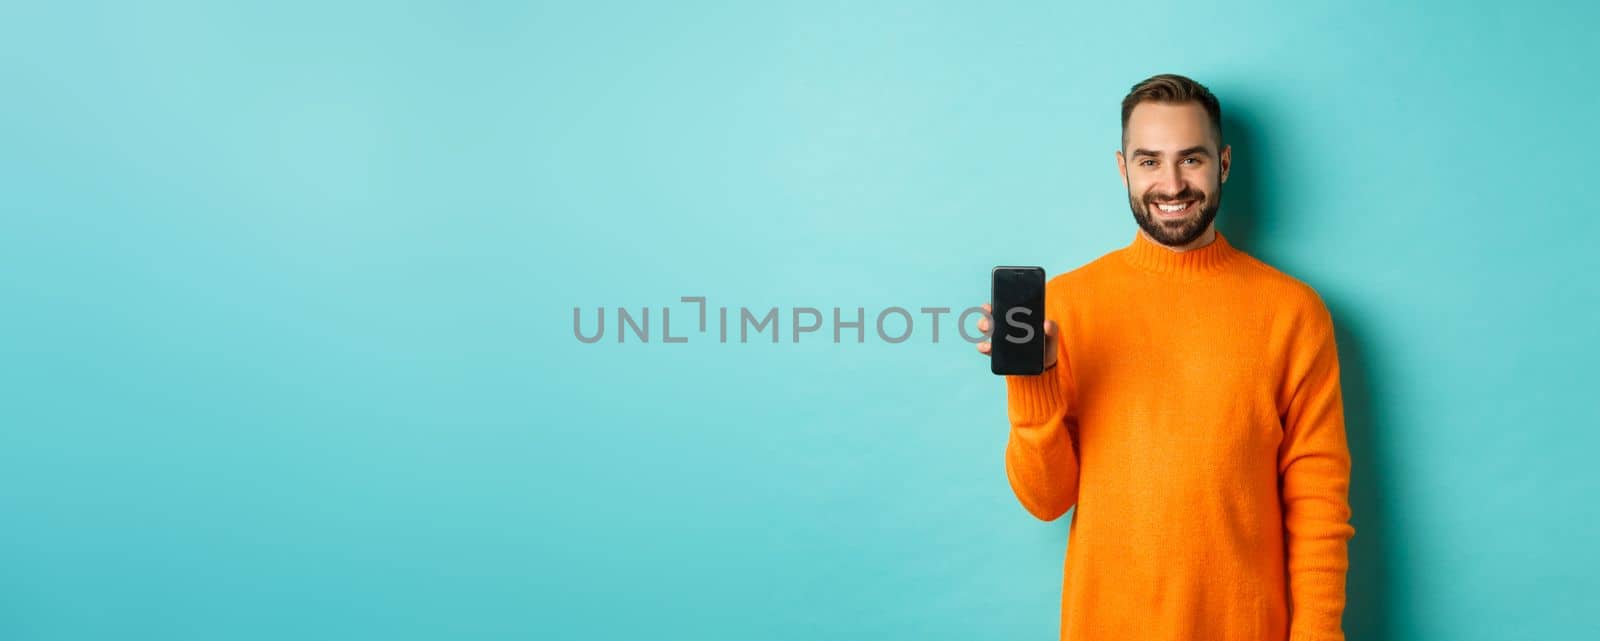 Handsome bearded guy in orange sweater, showing smartphone screen and smiling, showing promo online, turquoise background.